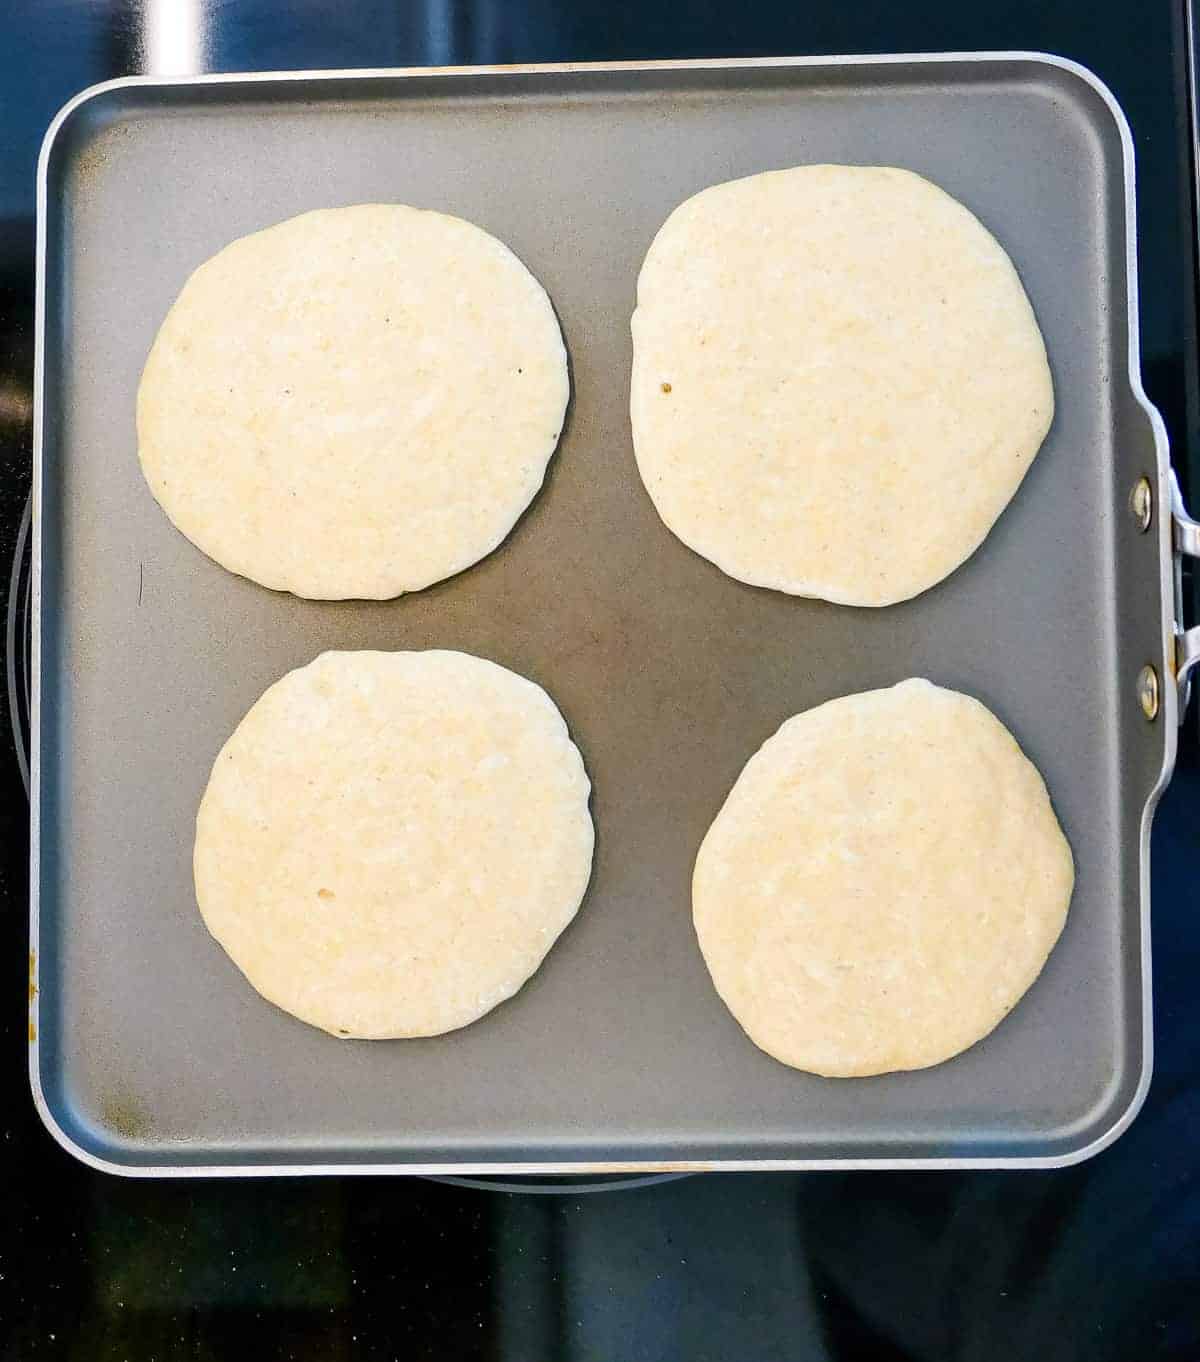 A square griddle pan with johnny cakes cooking on it